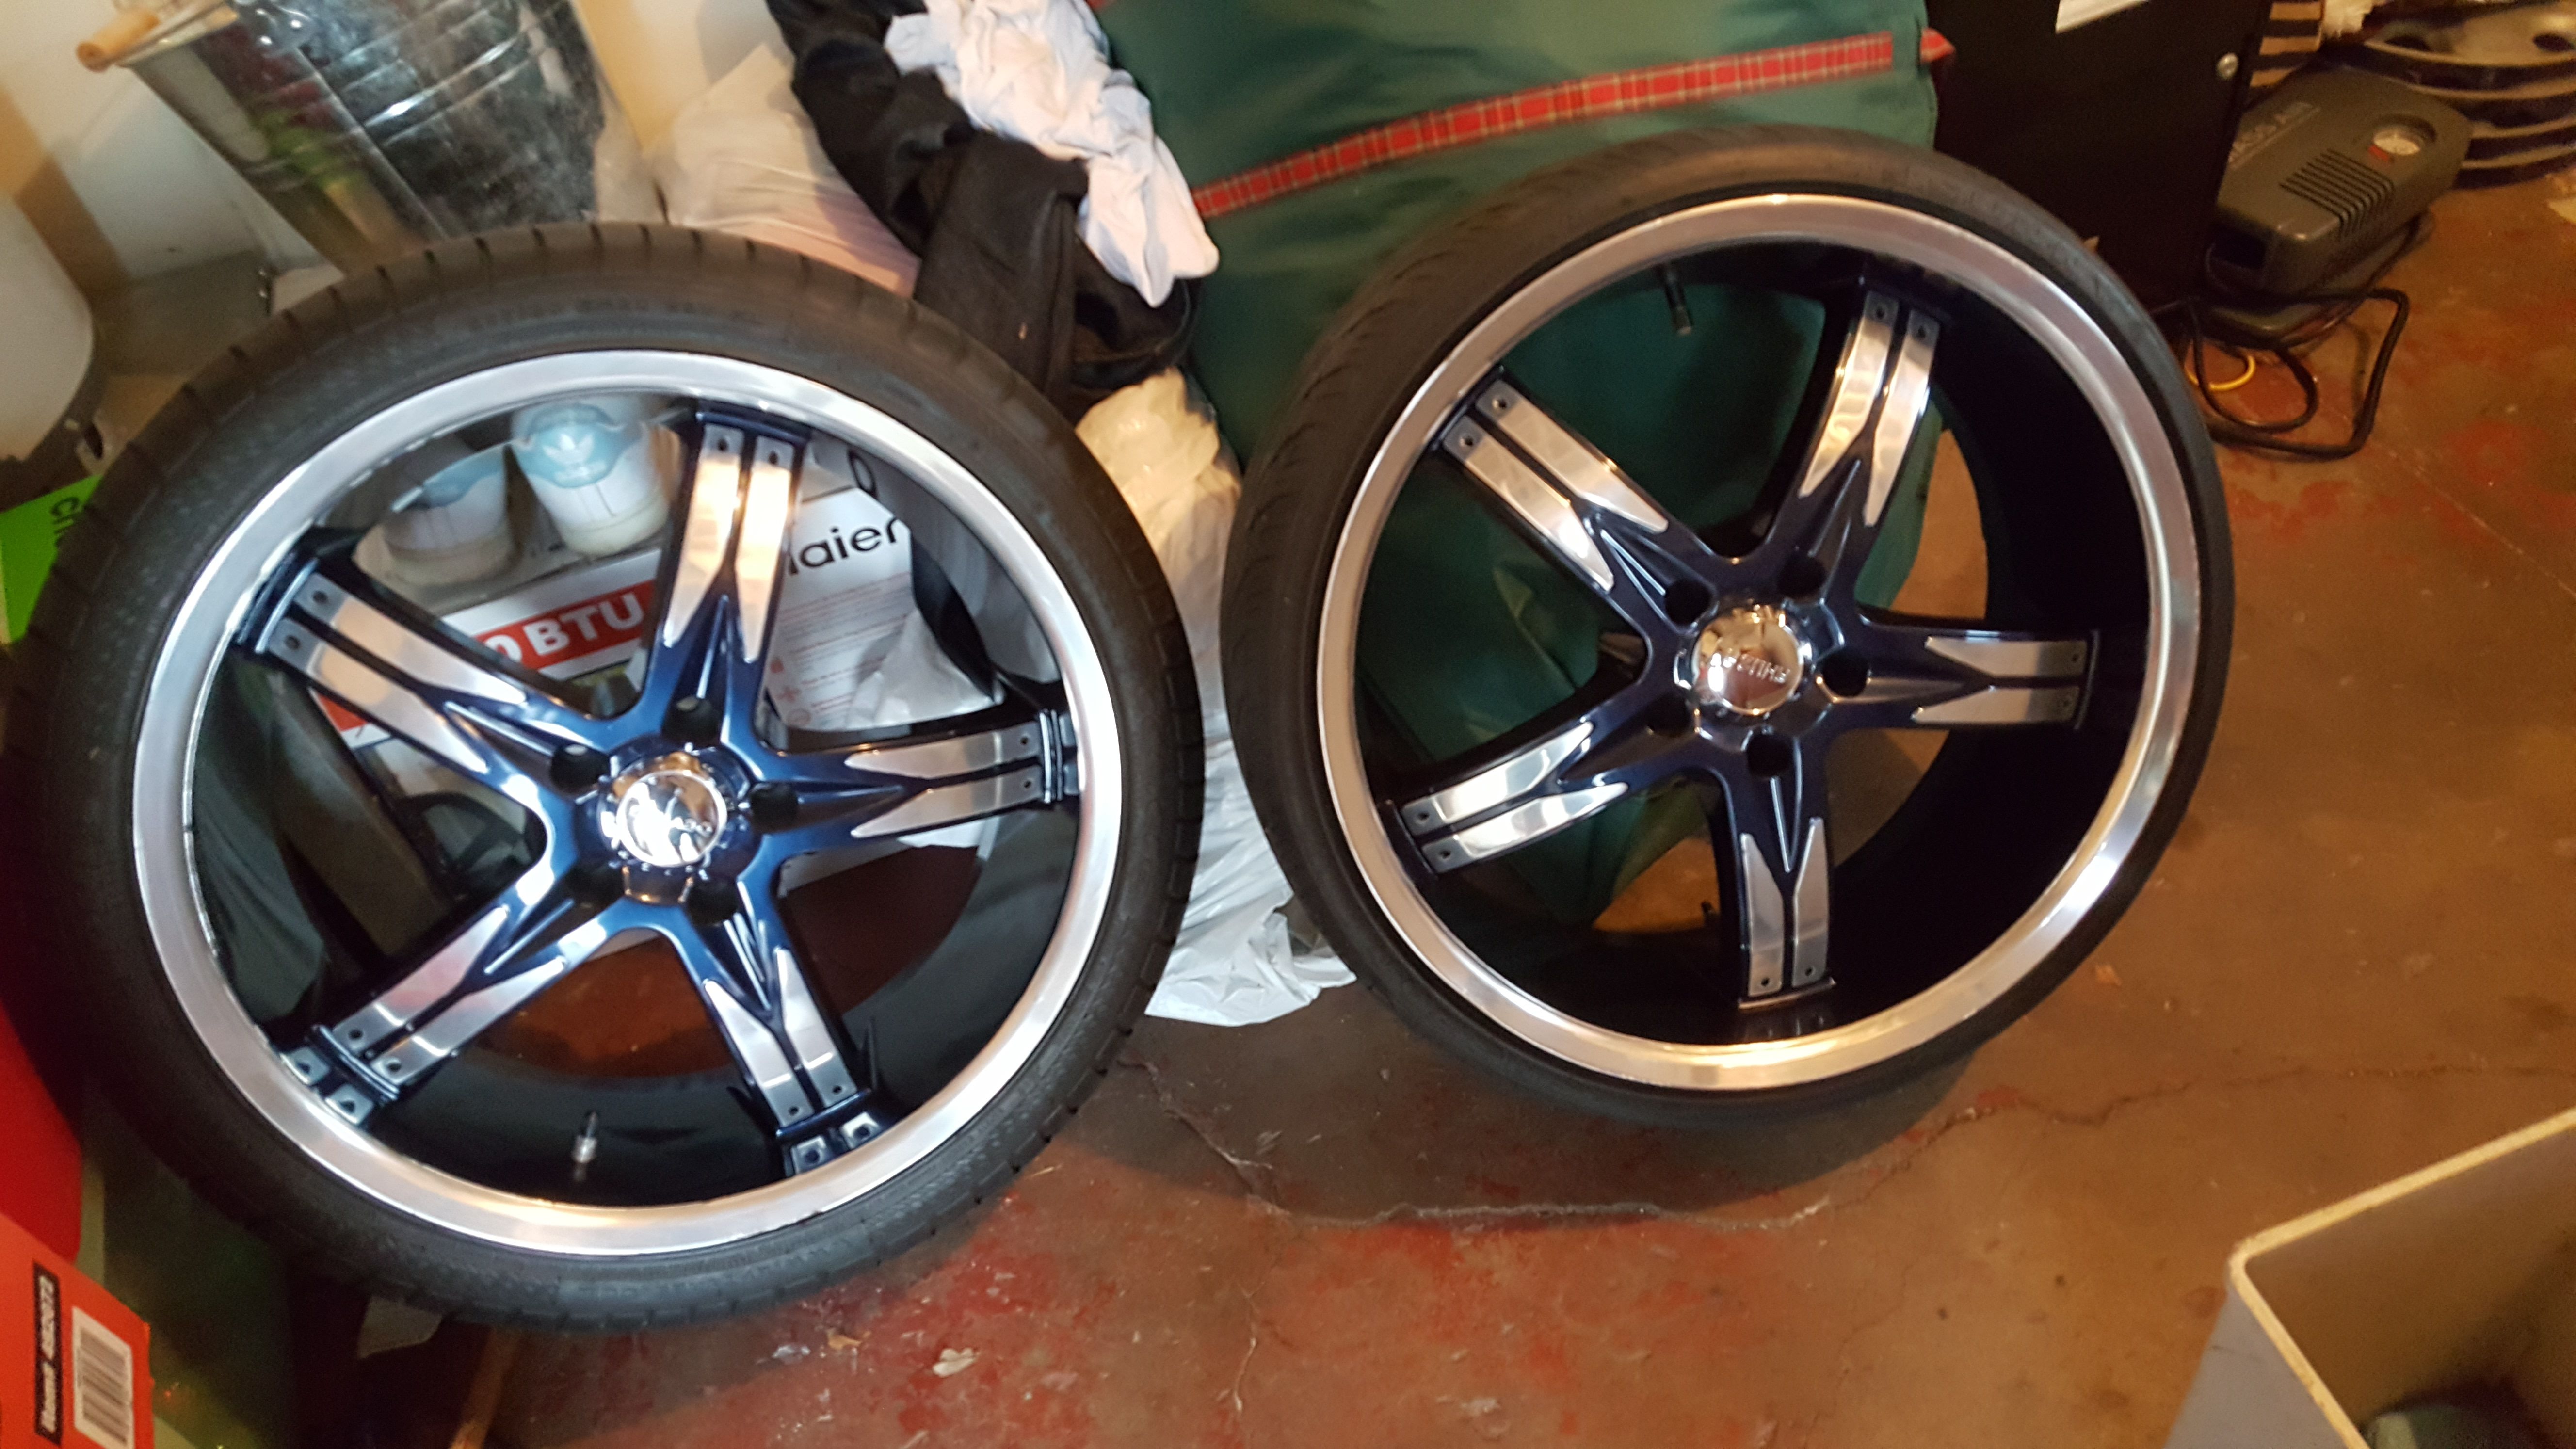 Complete set of custom 20" rims, blue & chrome. Two sets of tires, front used & rear new